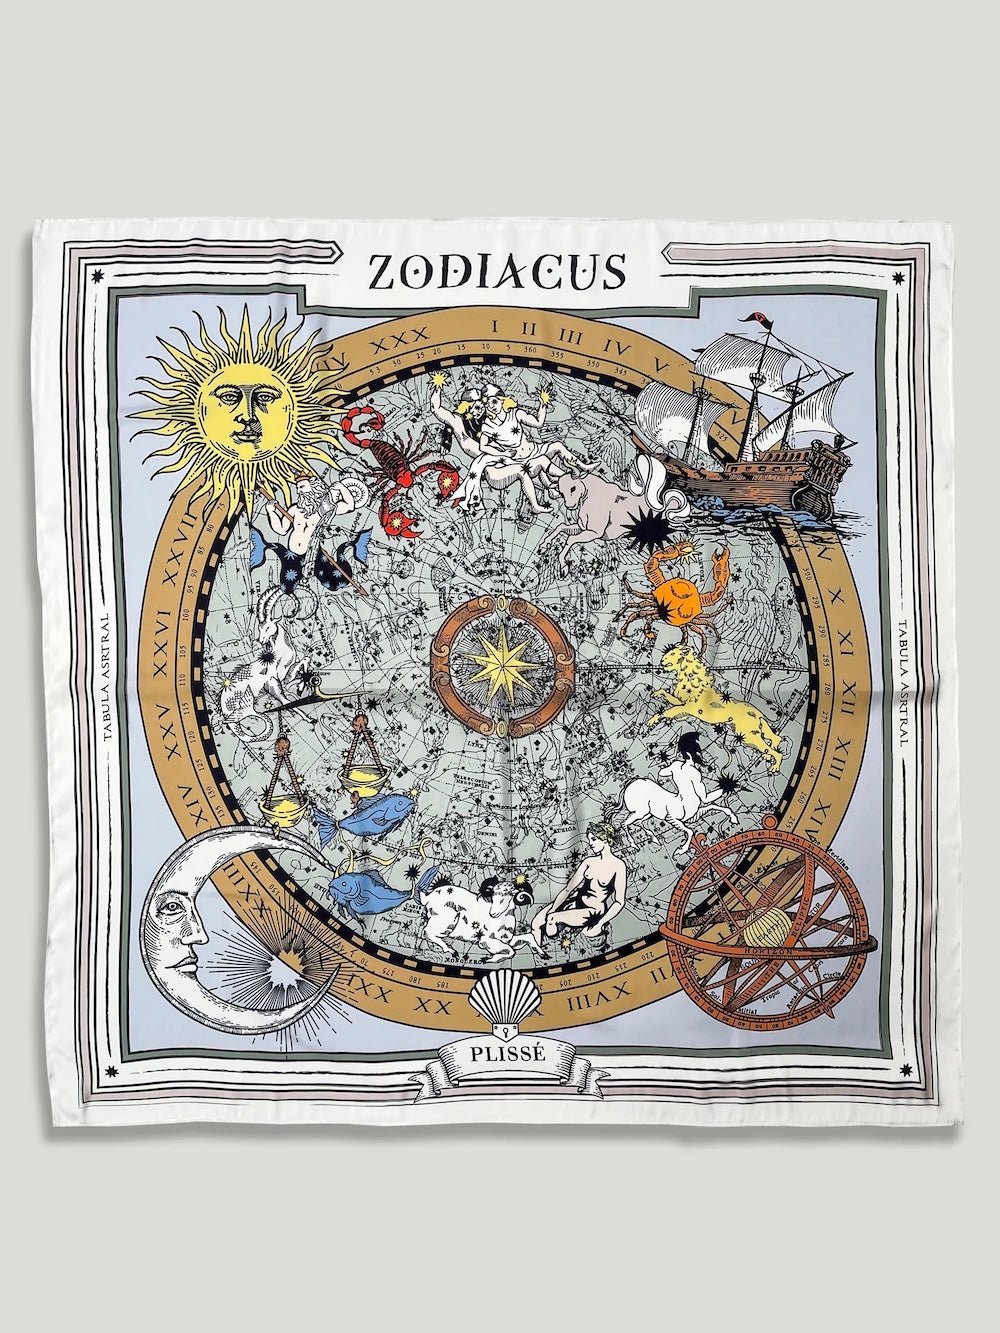 Zodiac Scarf for all zodiac signs made by Plissé. Image of all zodiac symbols, like the twins, bull, crab, lion, archer, etc. It is on top of a astrological background. Details like a orange ecliptic, yellow sun, and white moon. The scarf is white with brown details displayed on plain white background.